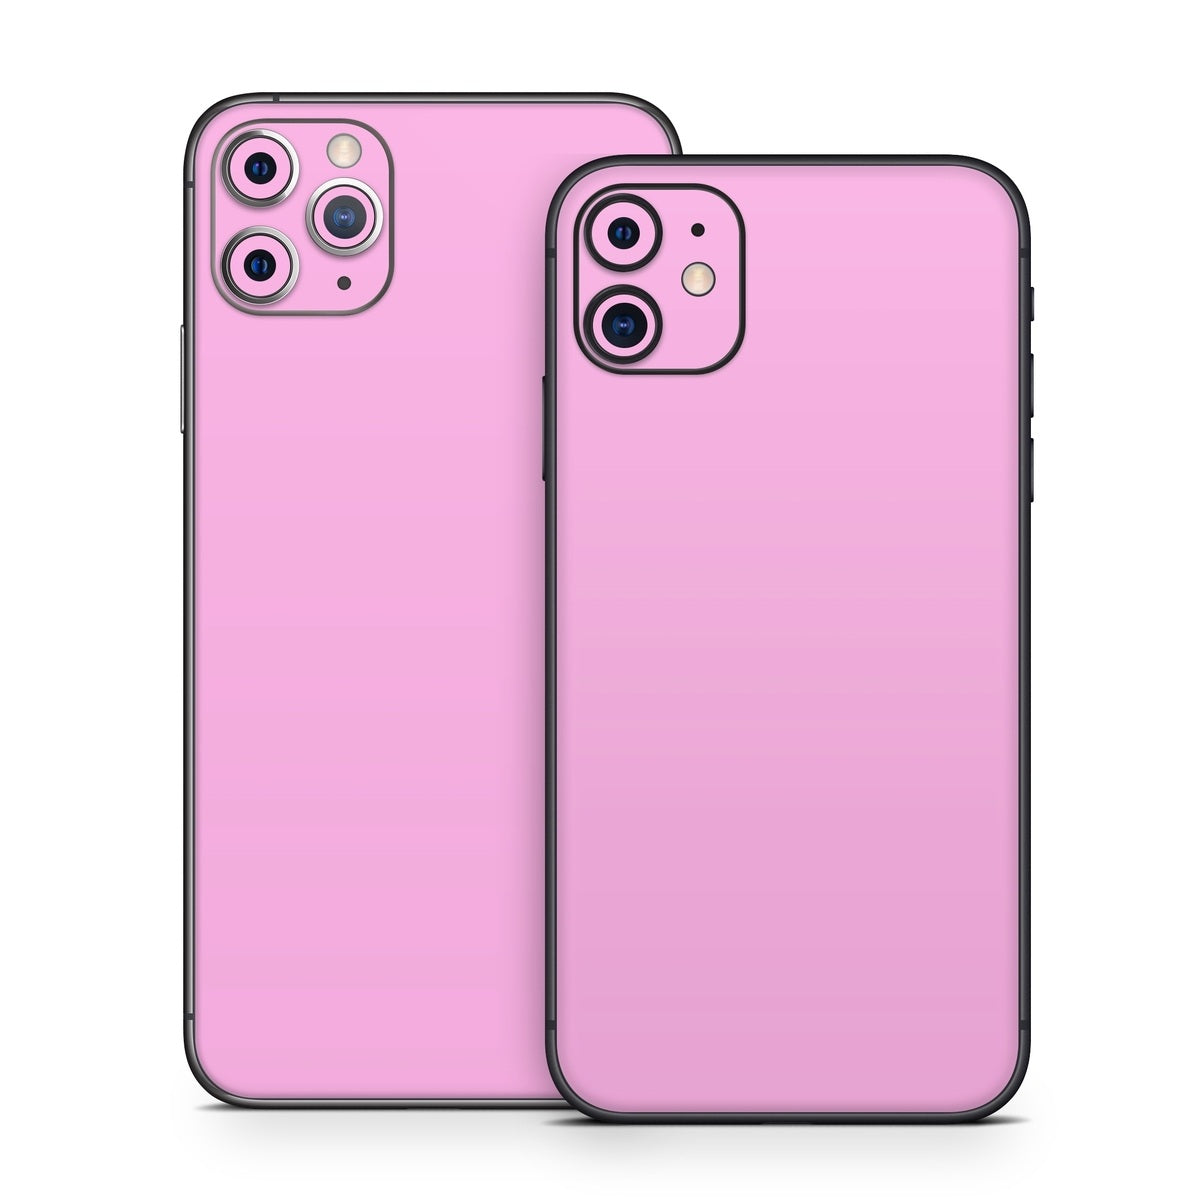 Solid State Pink - Apple iPhone 11 Skin